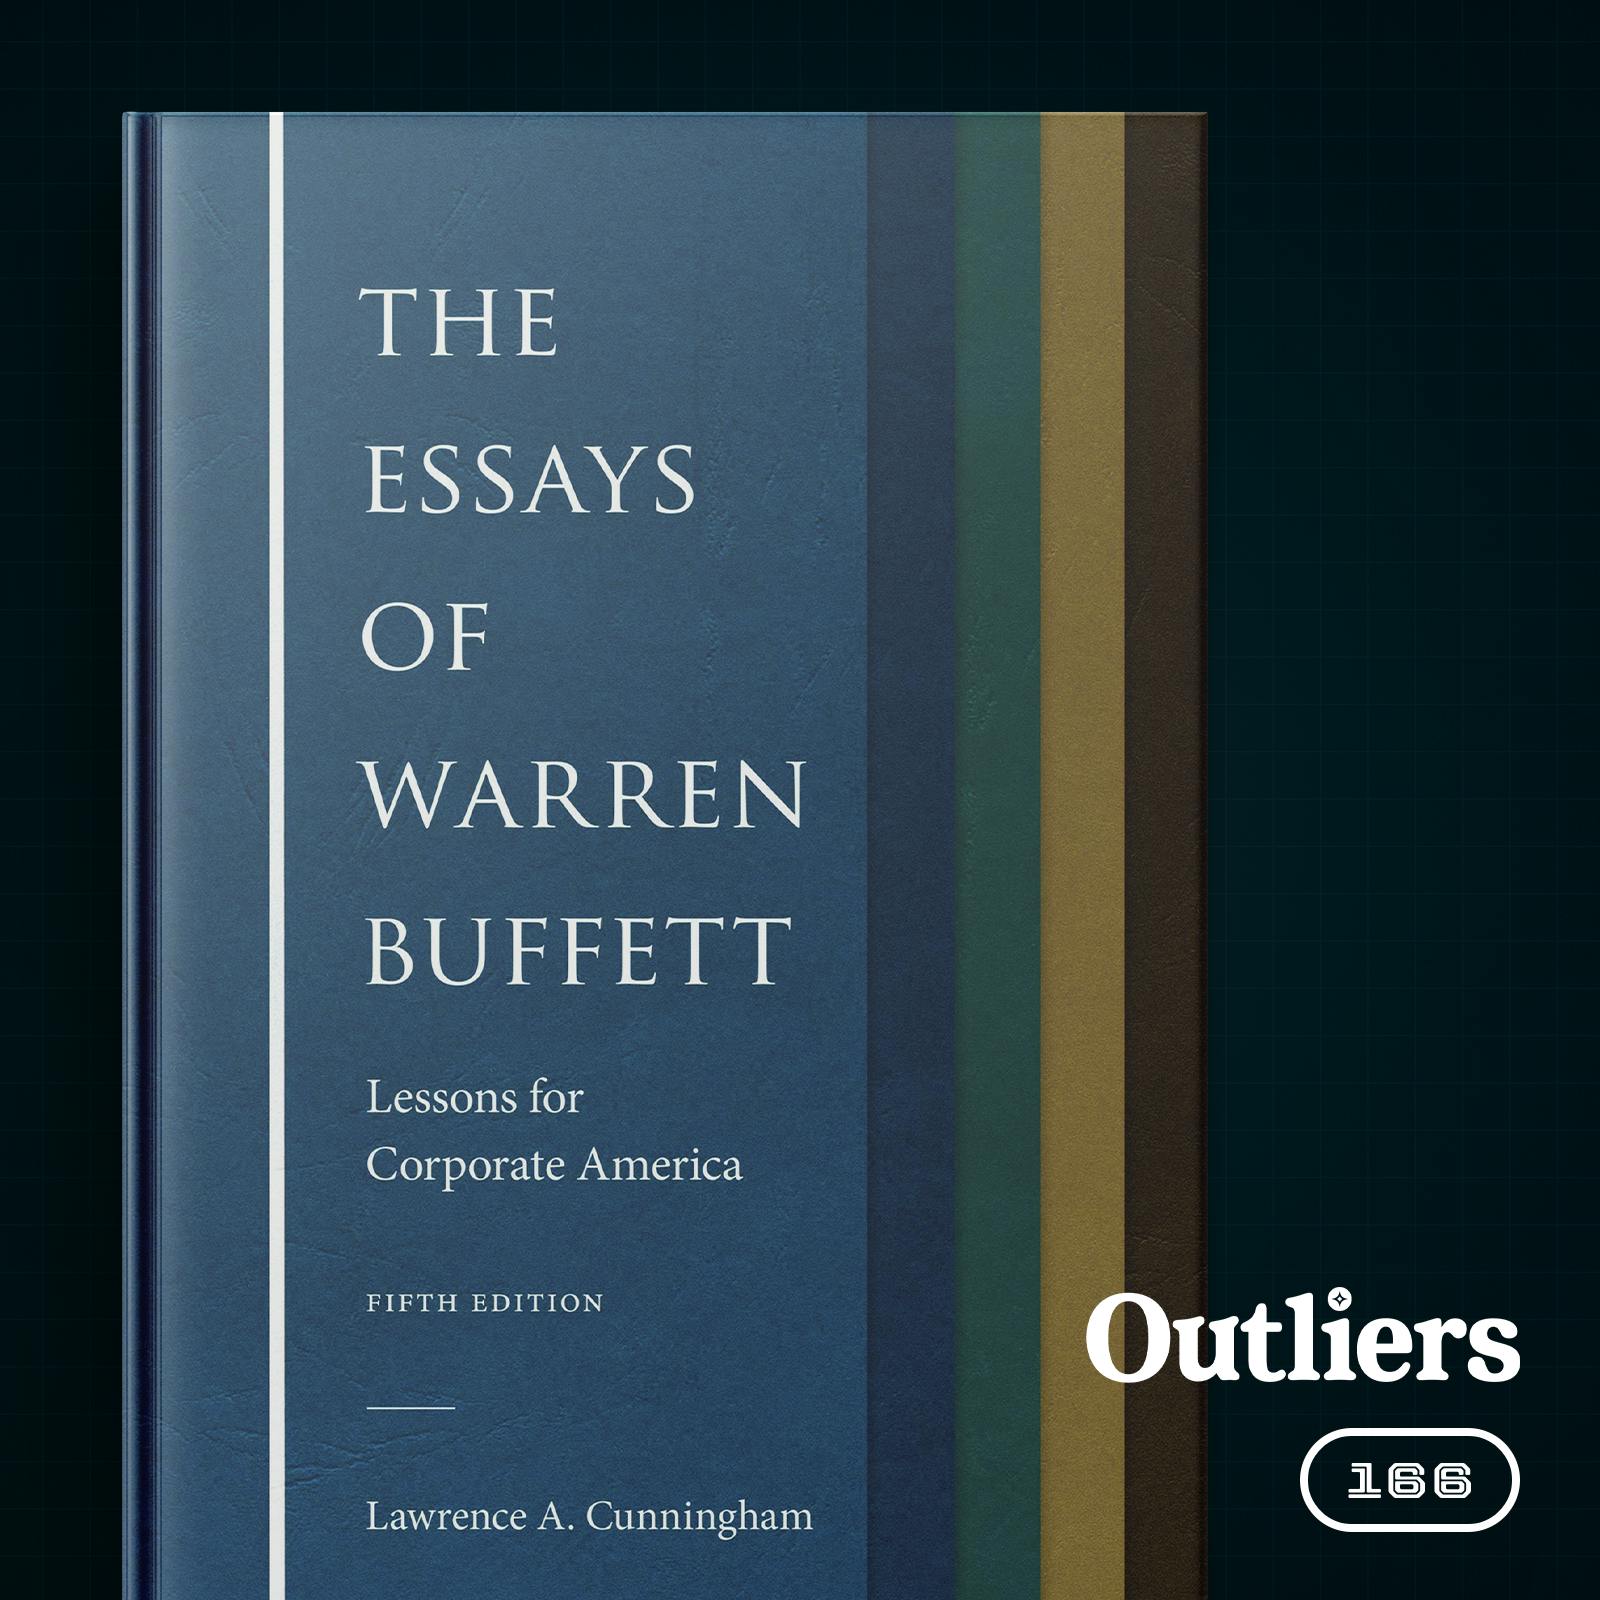 Trailer - #166 Book Breakdown (Part 2 of 2): “The Essays of Warren Buffett: Lessons for Corporate America” by Lawrence Cunningham | Outliers with Daniel Scrivner